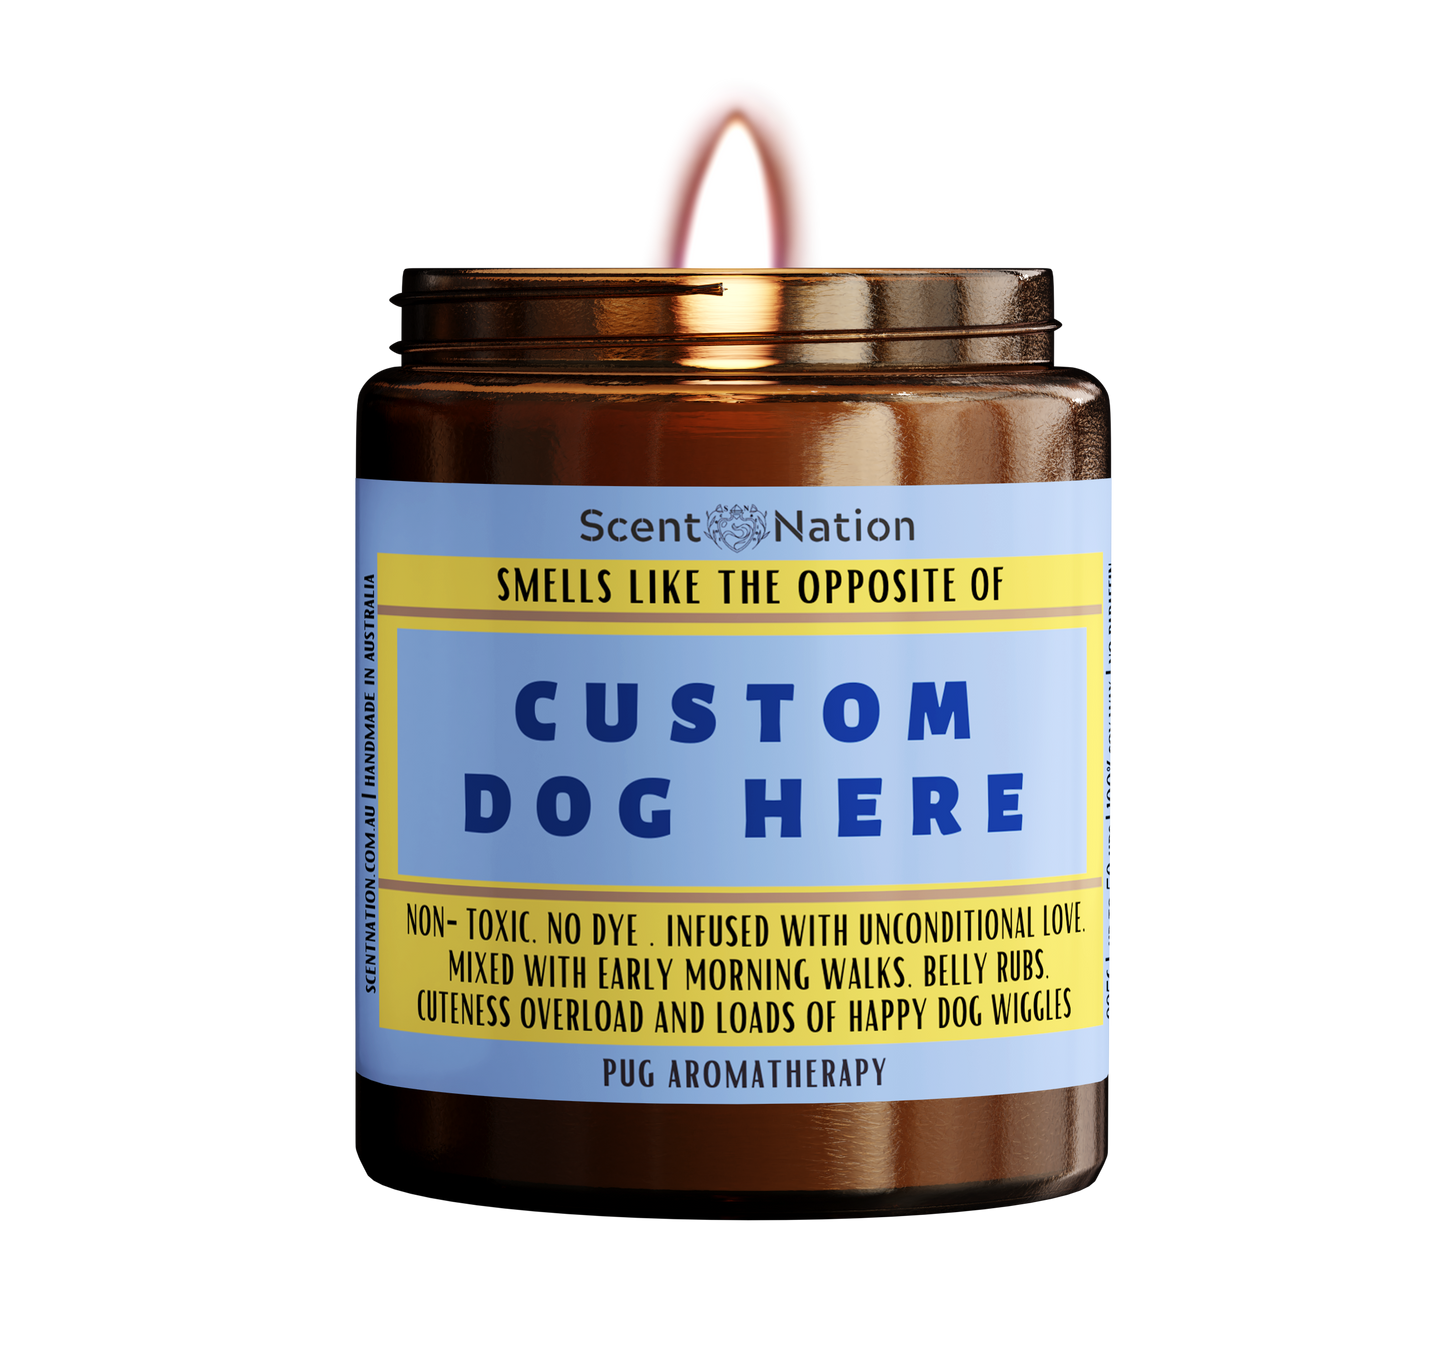 Golden Retriever Gifts-Funny Dog Gifts for Dog Lovers.